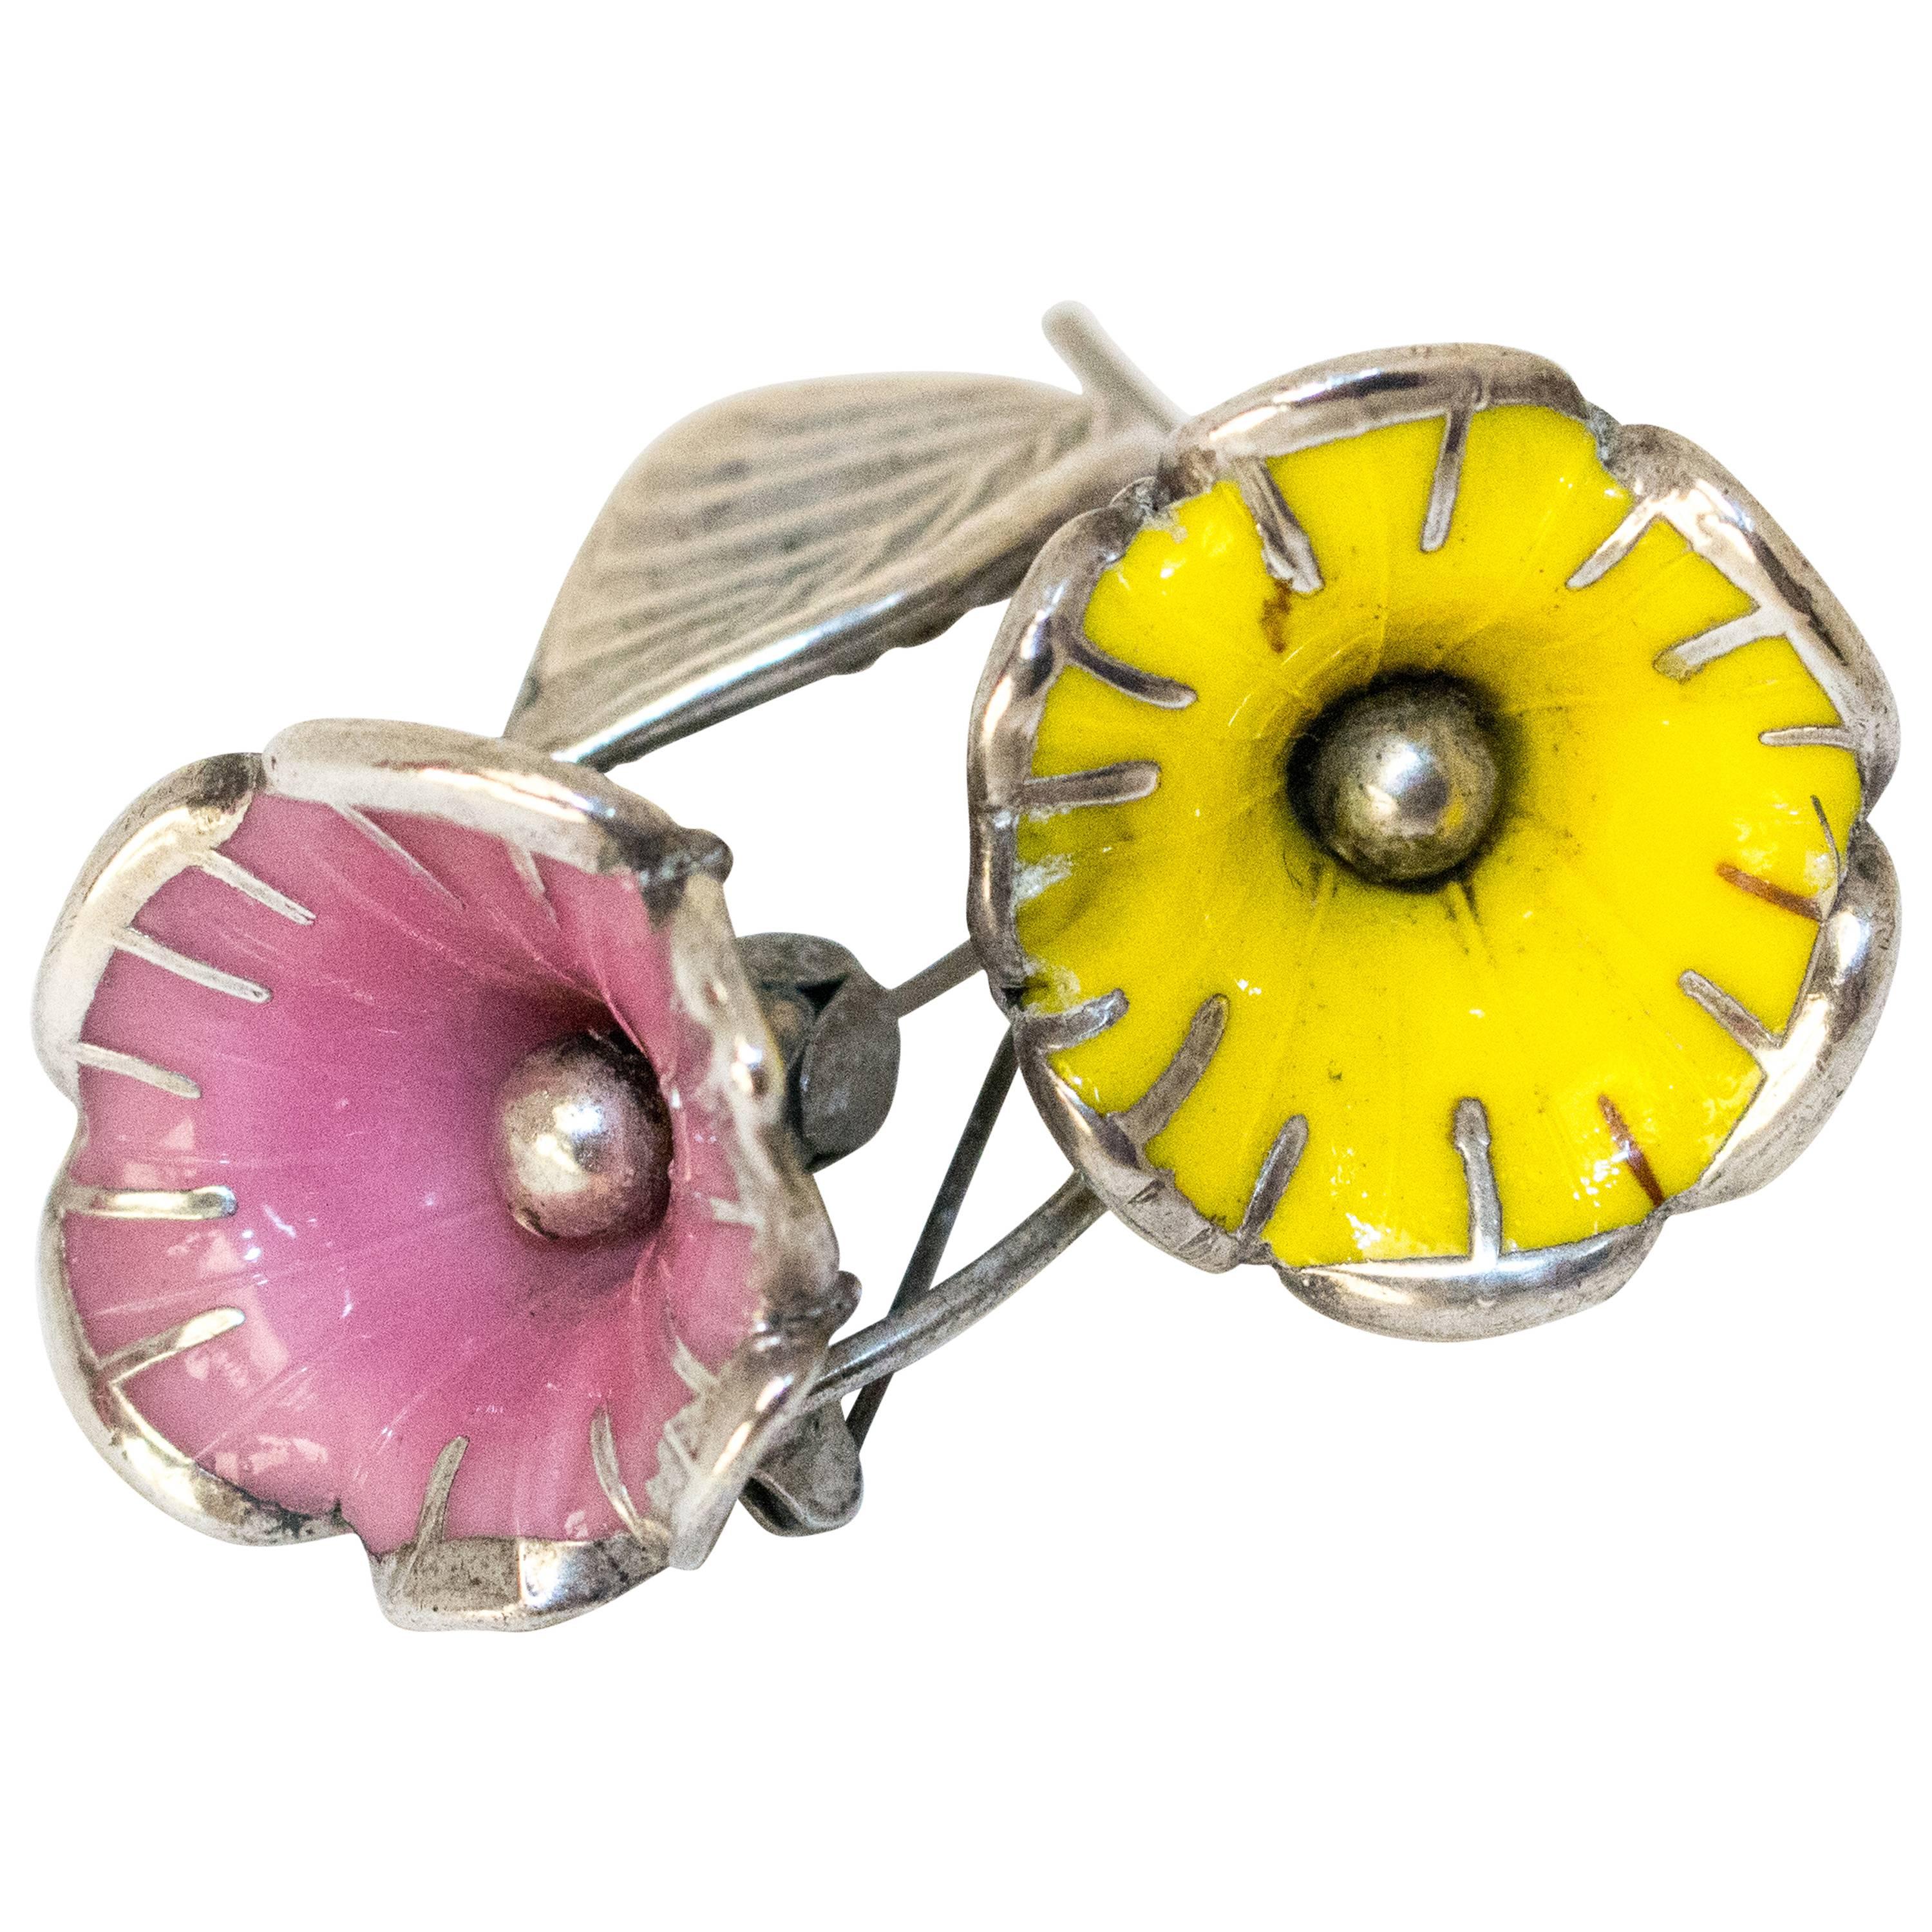 40s Sterling Silver Flower Brooch with Yellow & Pink Enamel Petals